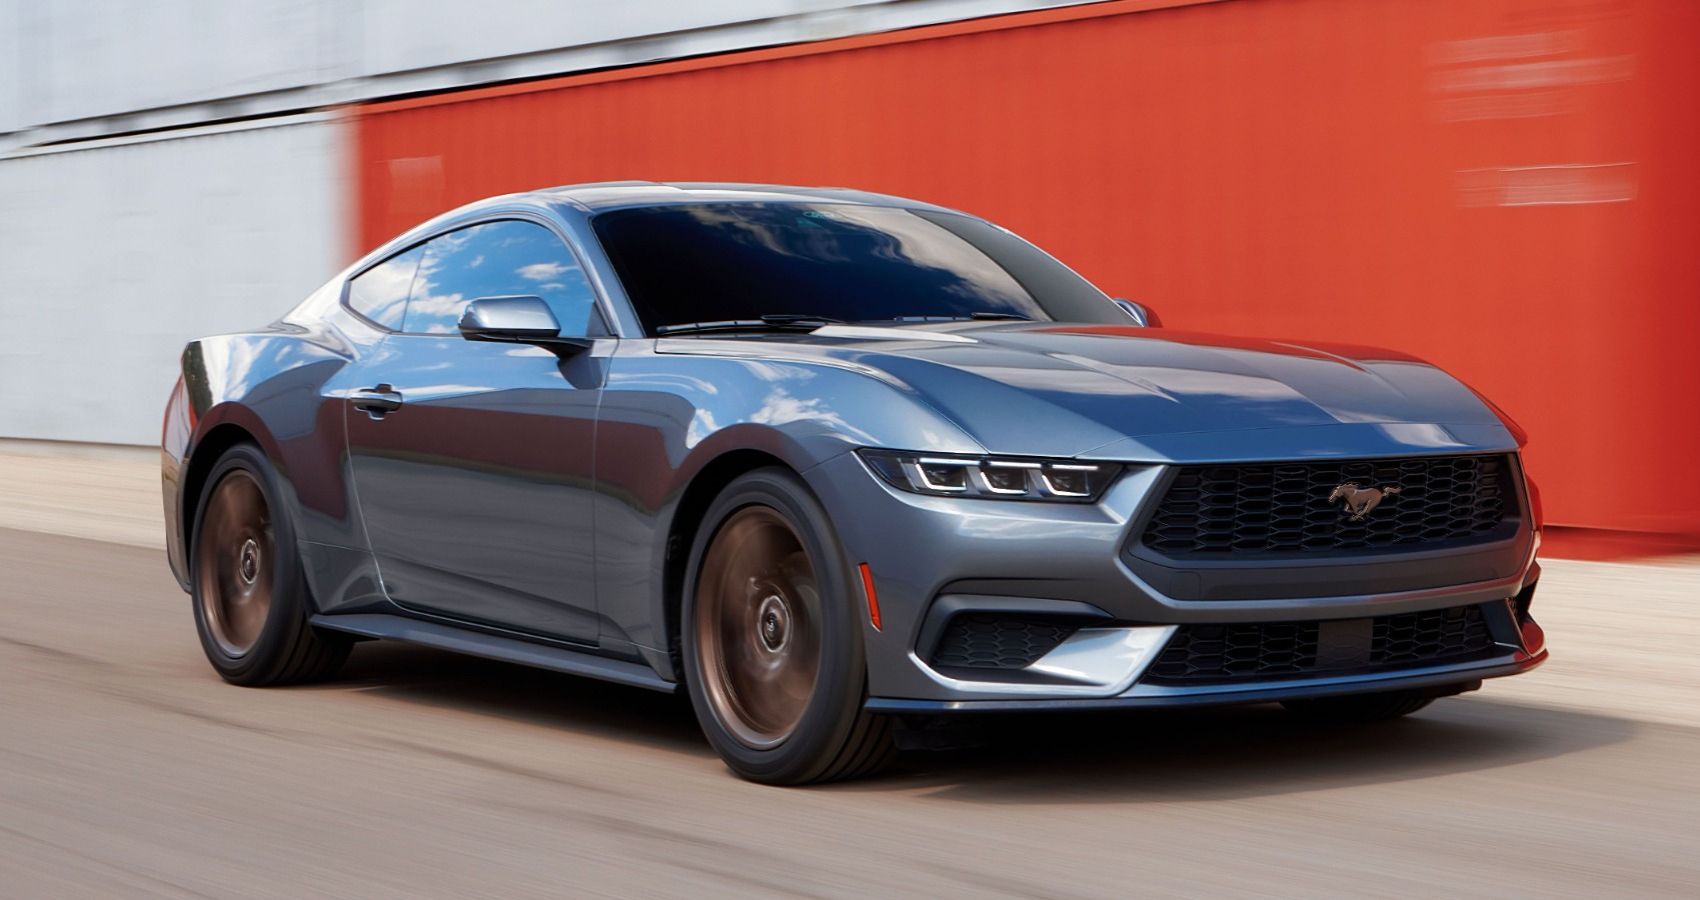 Why The Seventh Gen Mustang Will Be Ford's Last True Muscle Car